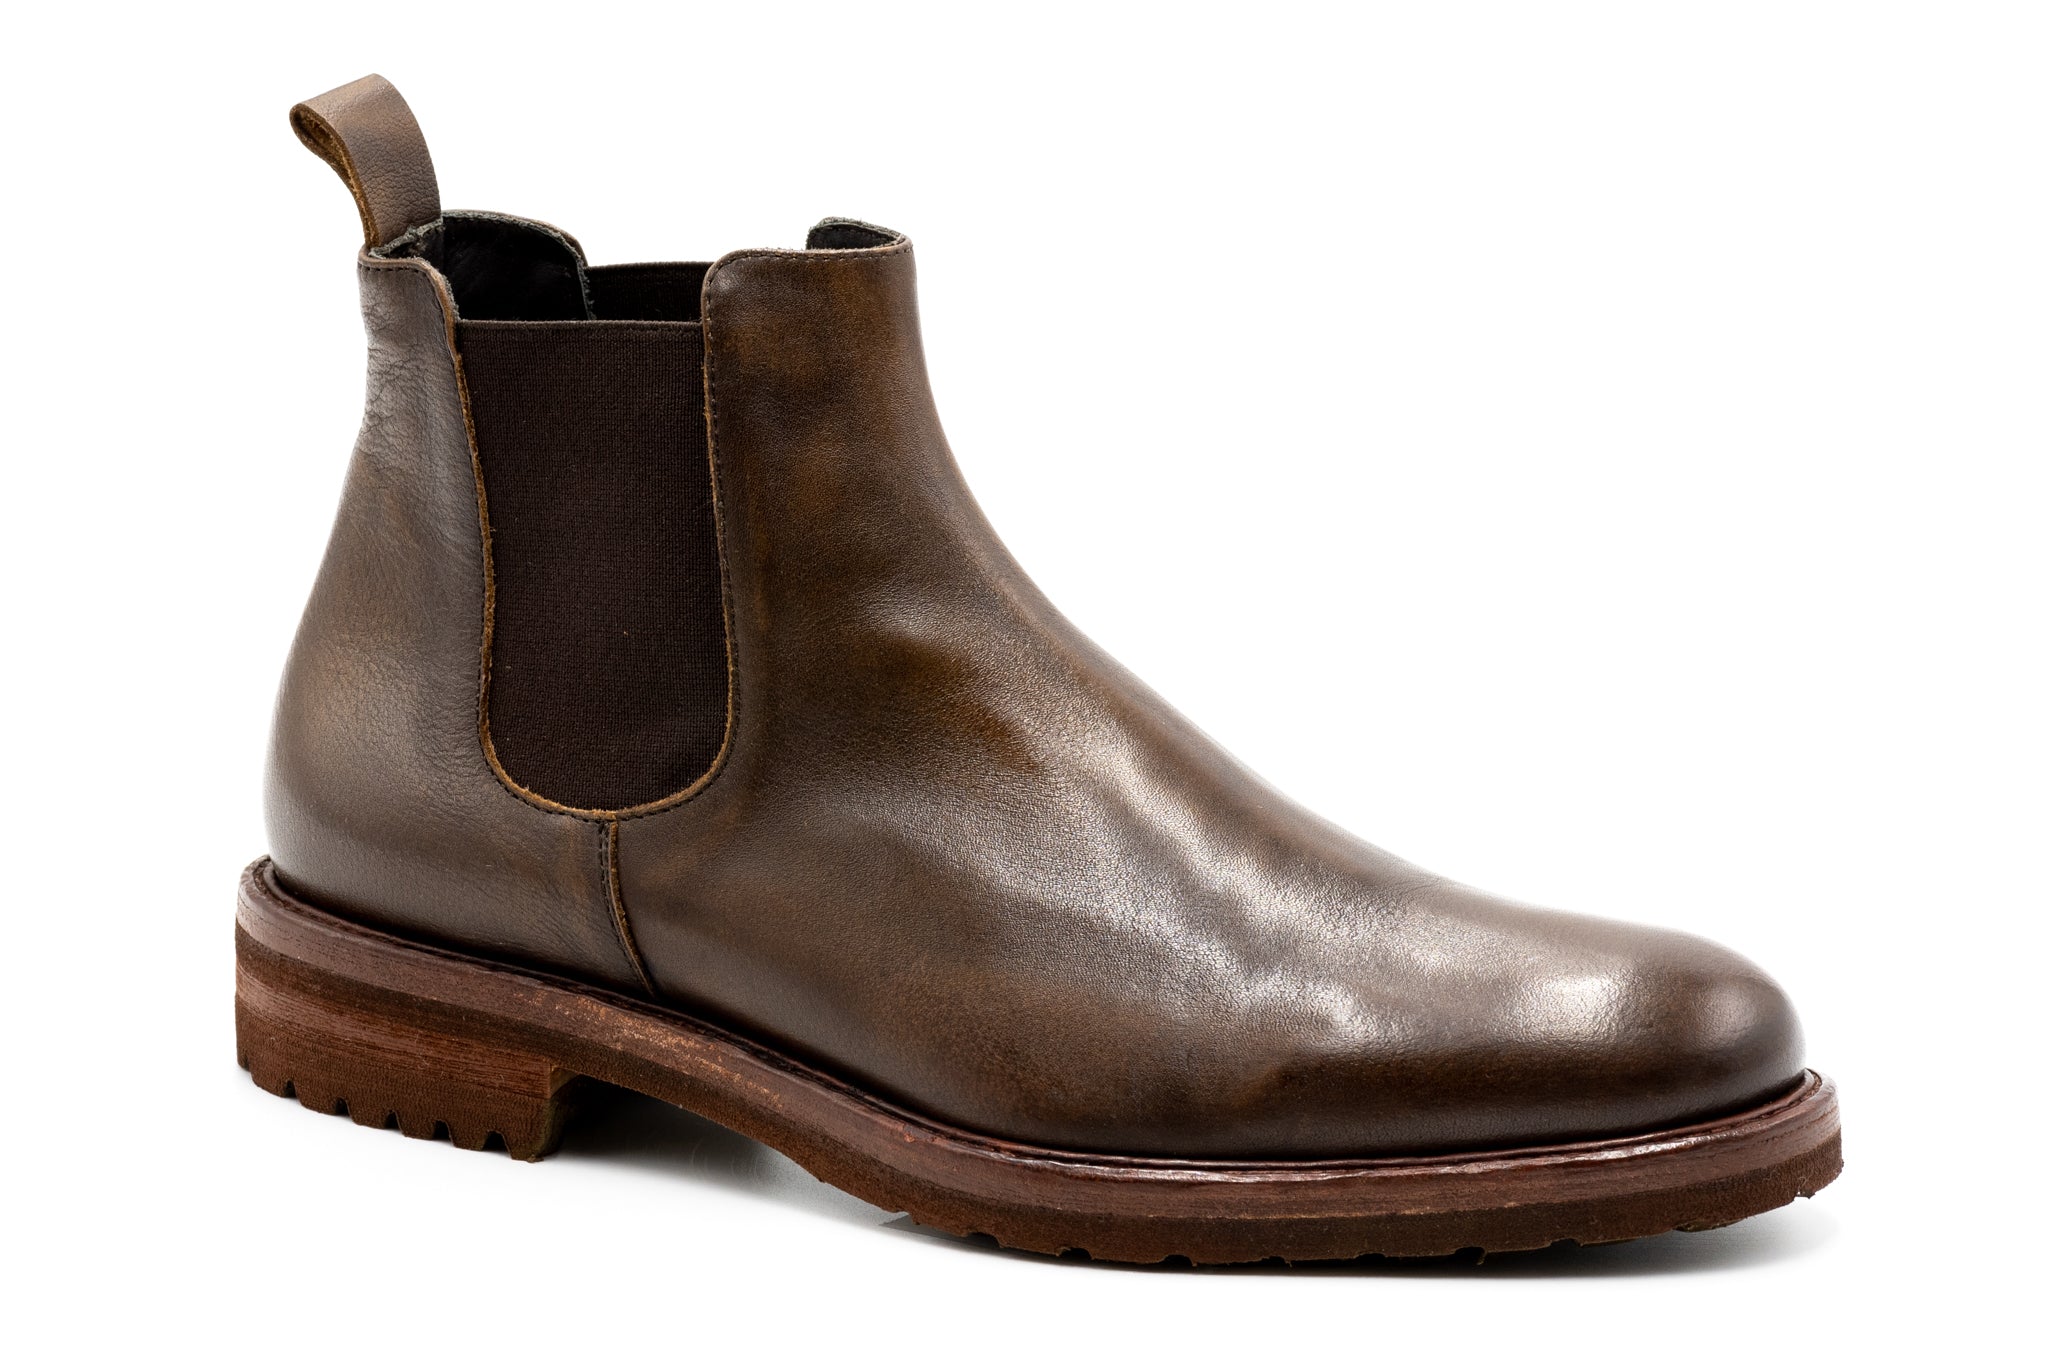 Selected Louis chelsea boots in tan leather